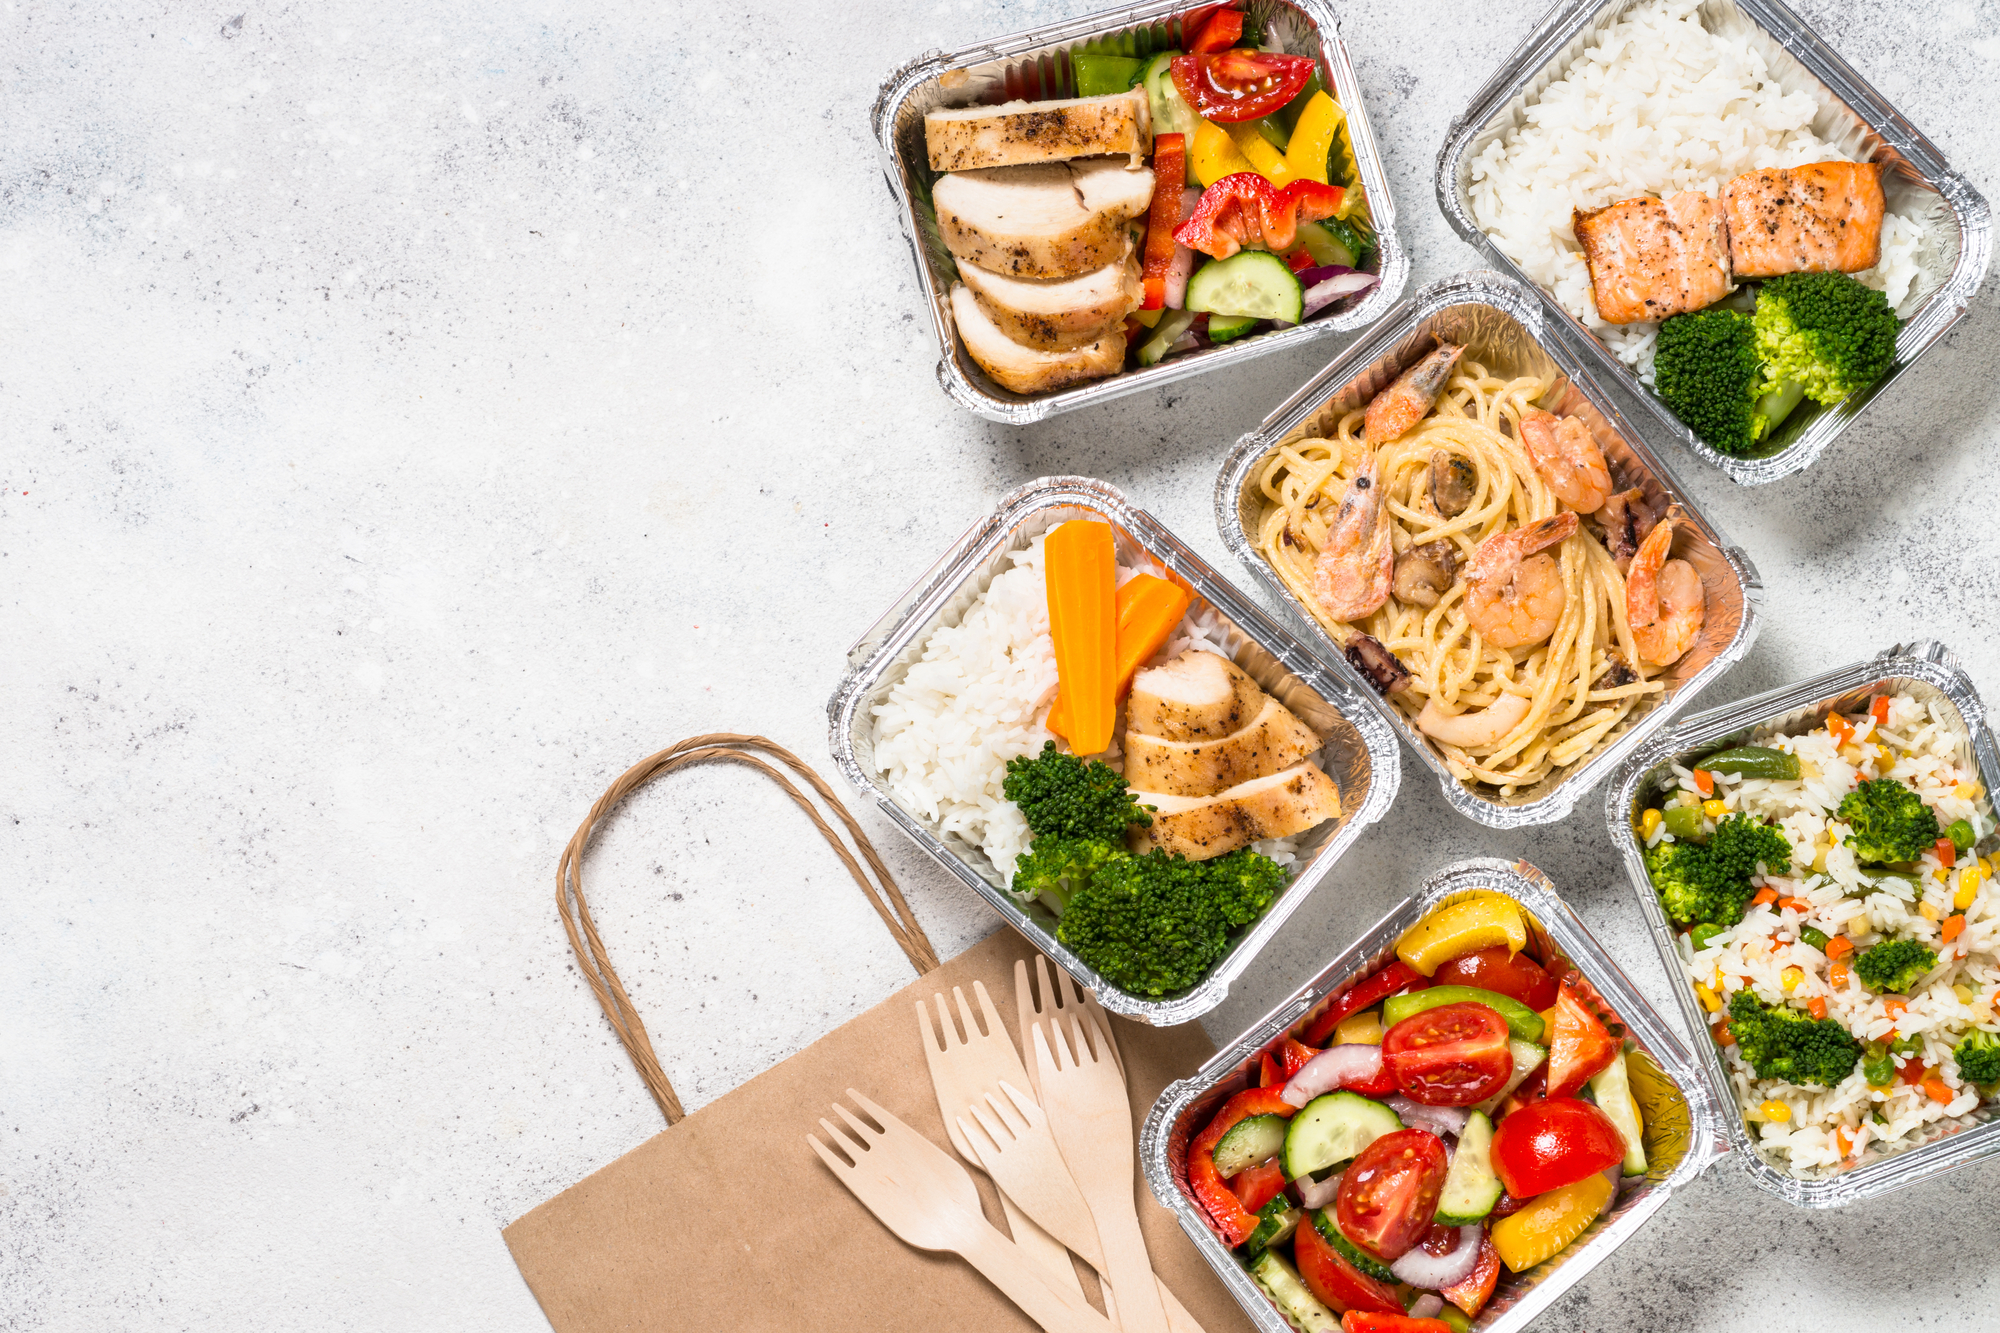 Are Food Delivery Services Sustainable? | WorkWave